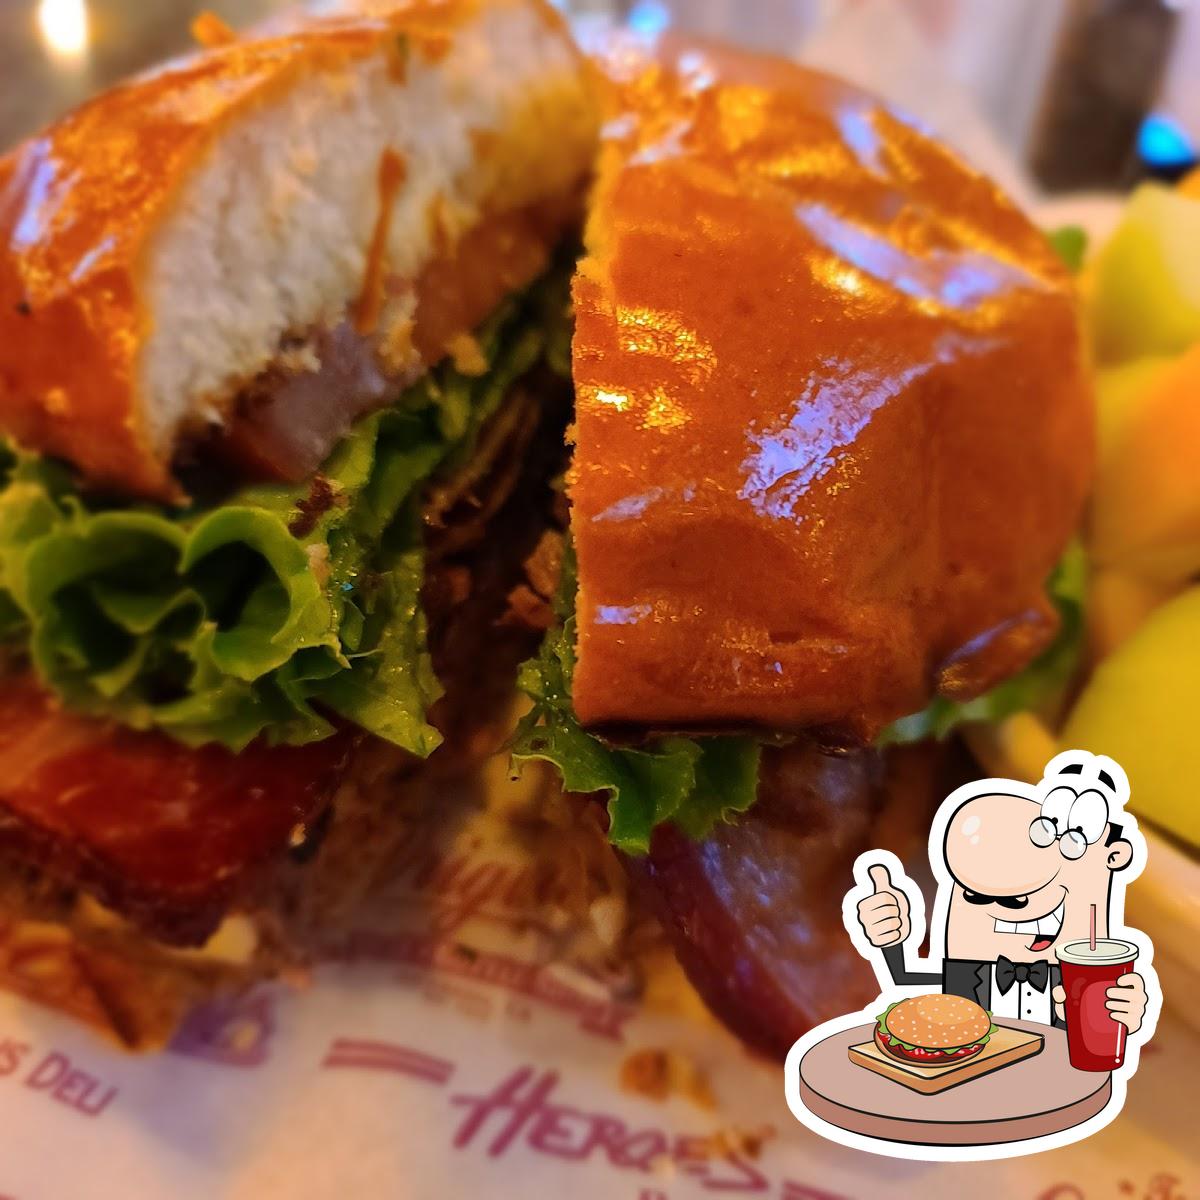 BBQ Bacon Burger - Burgers - Heroes Restaurant & Brewhouse-Eastvale